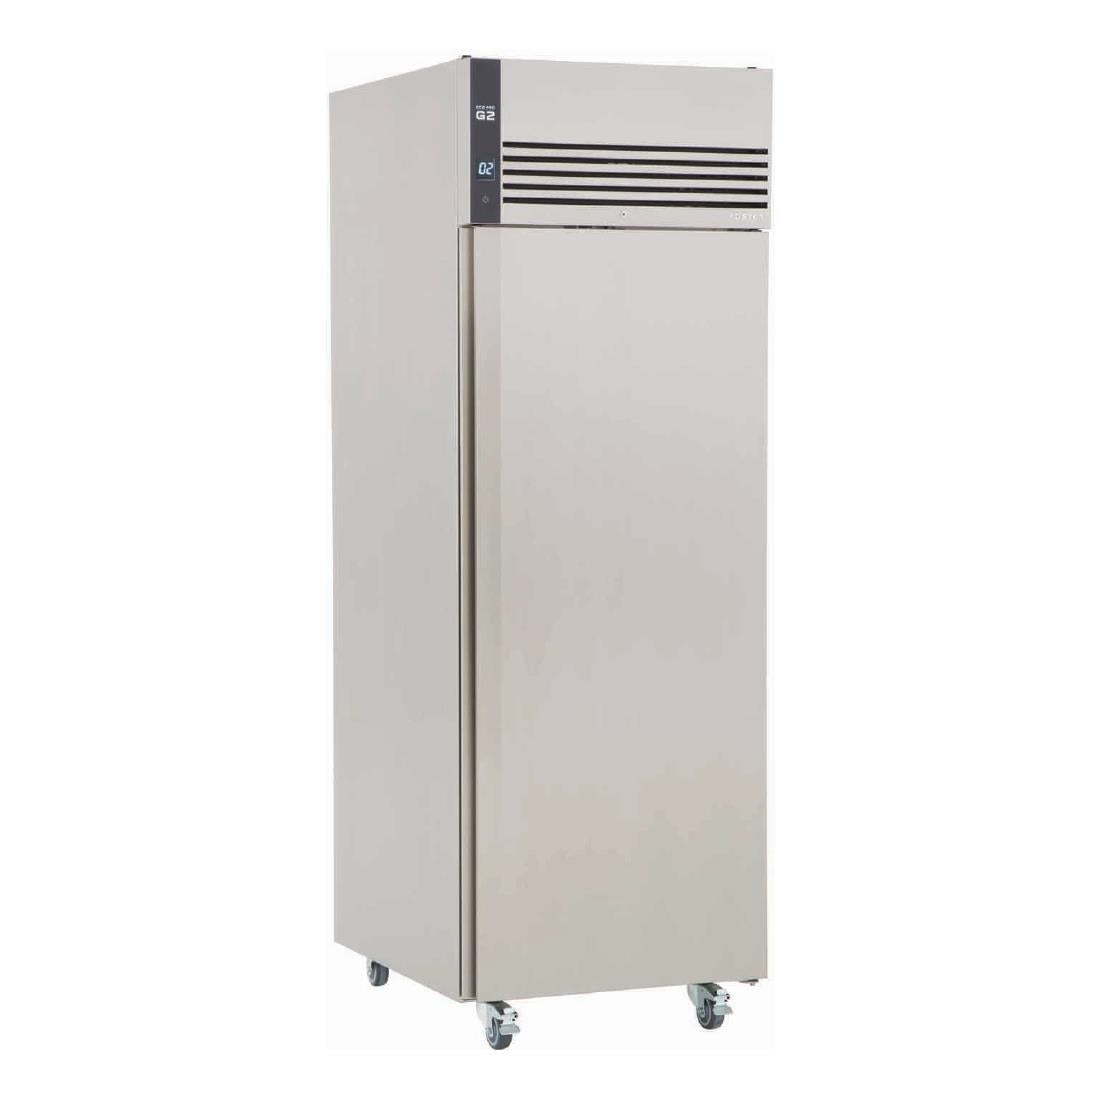 Foster EcoPro G2 1 Door 600Ltr Cabinet Freezer with Back EP700L 10/120